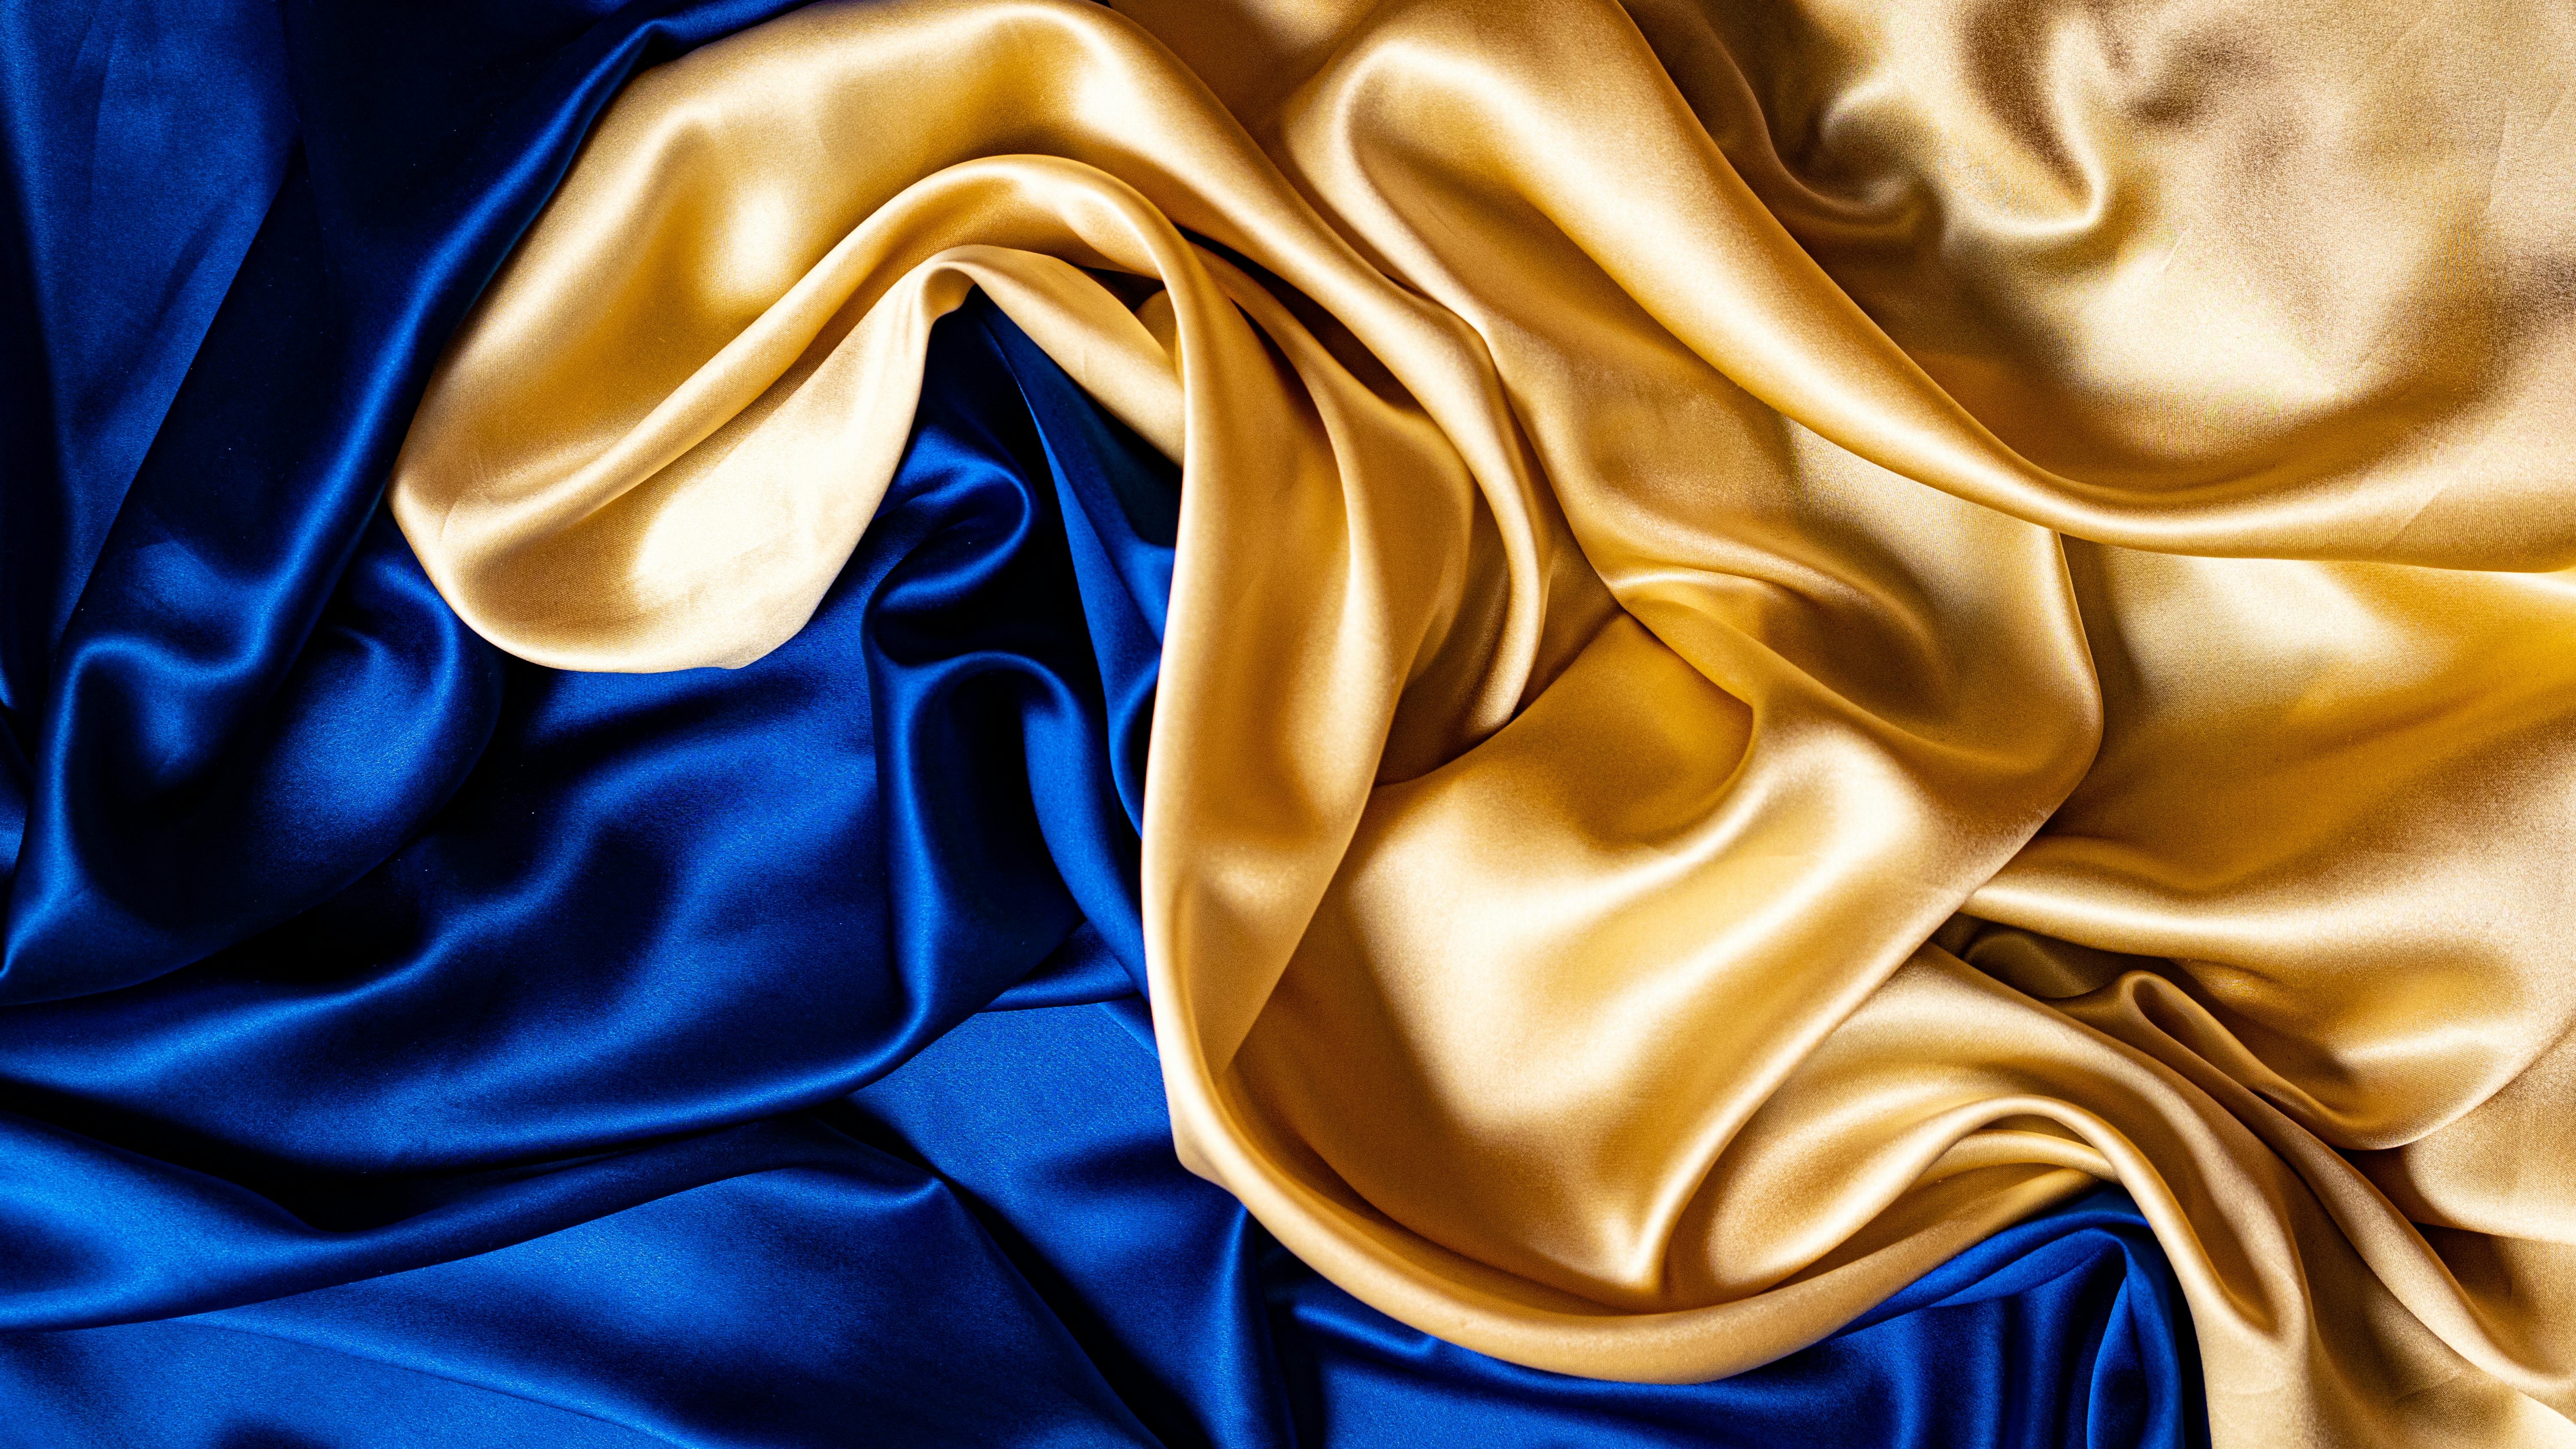 A rectangular image of a Close-up Shot of a Blue and Gold Colored Silk Cloth.